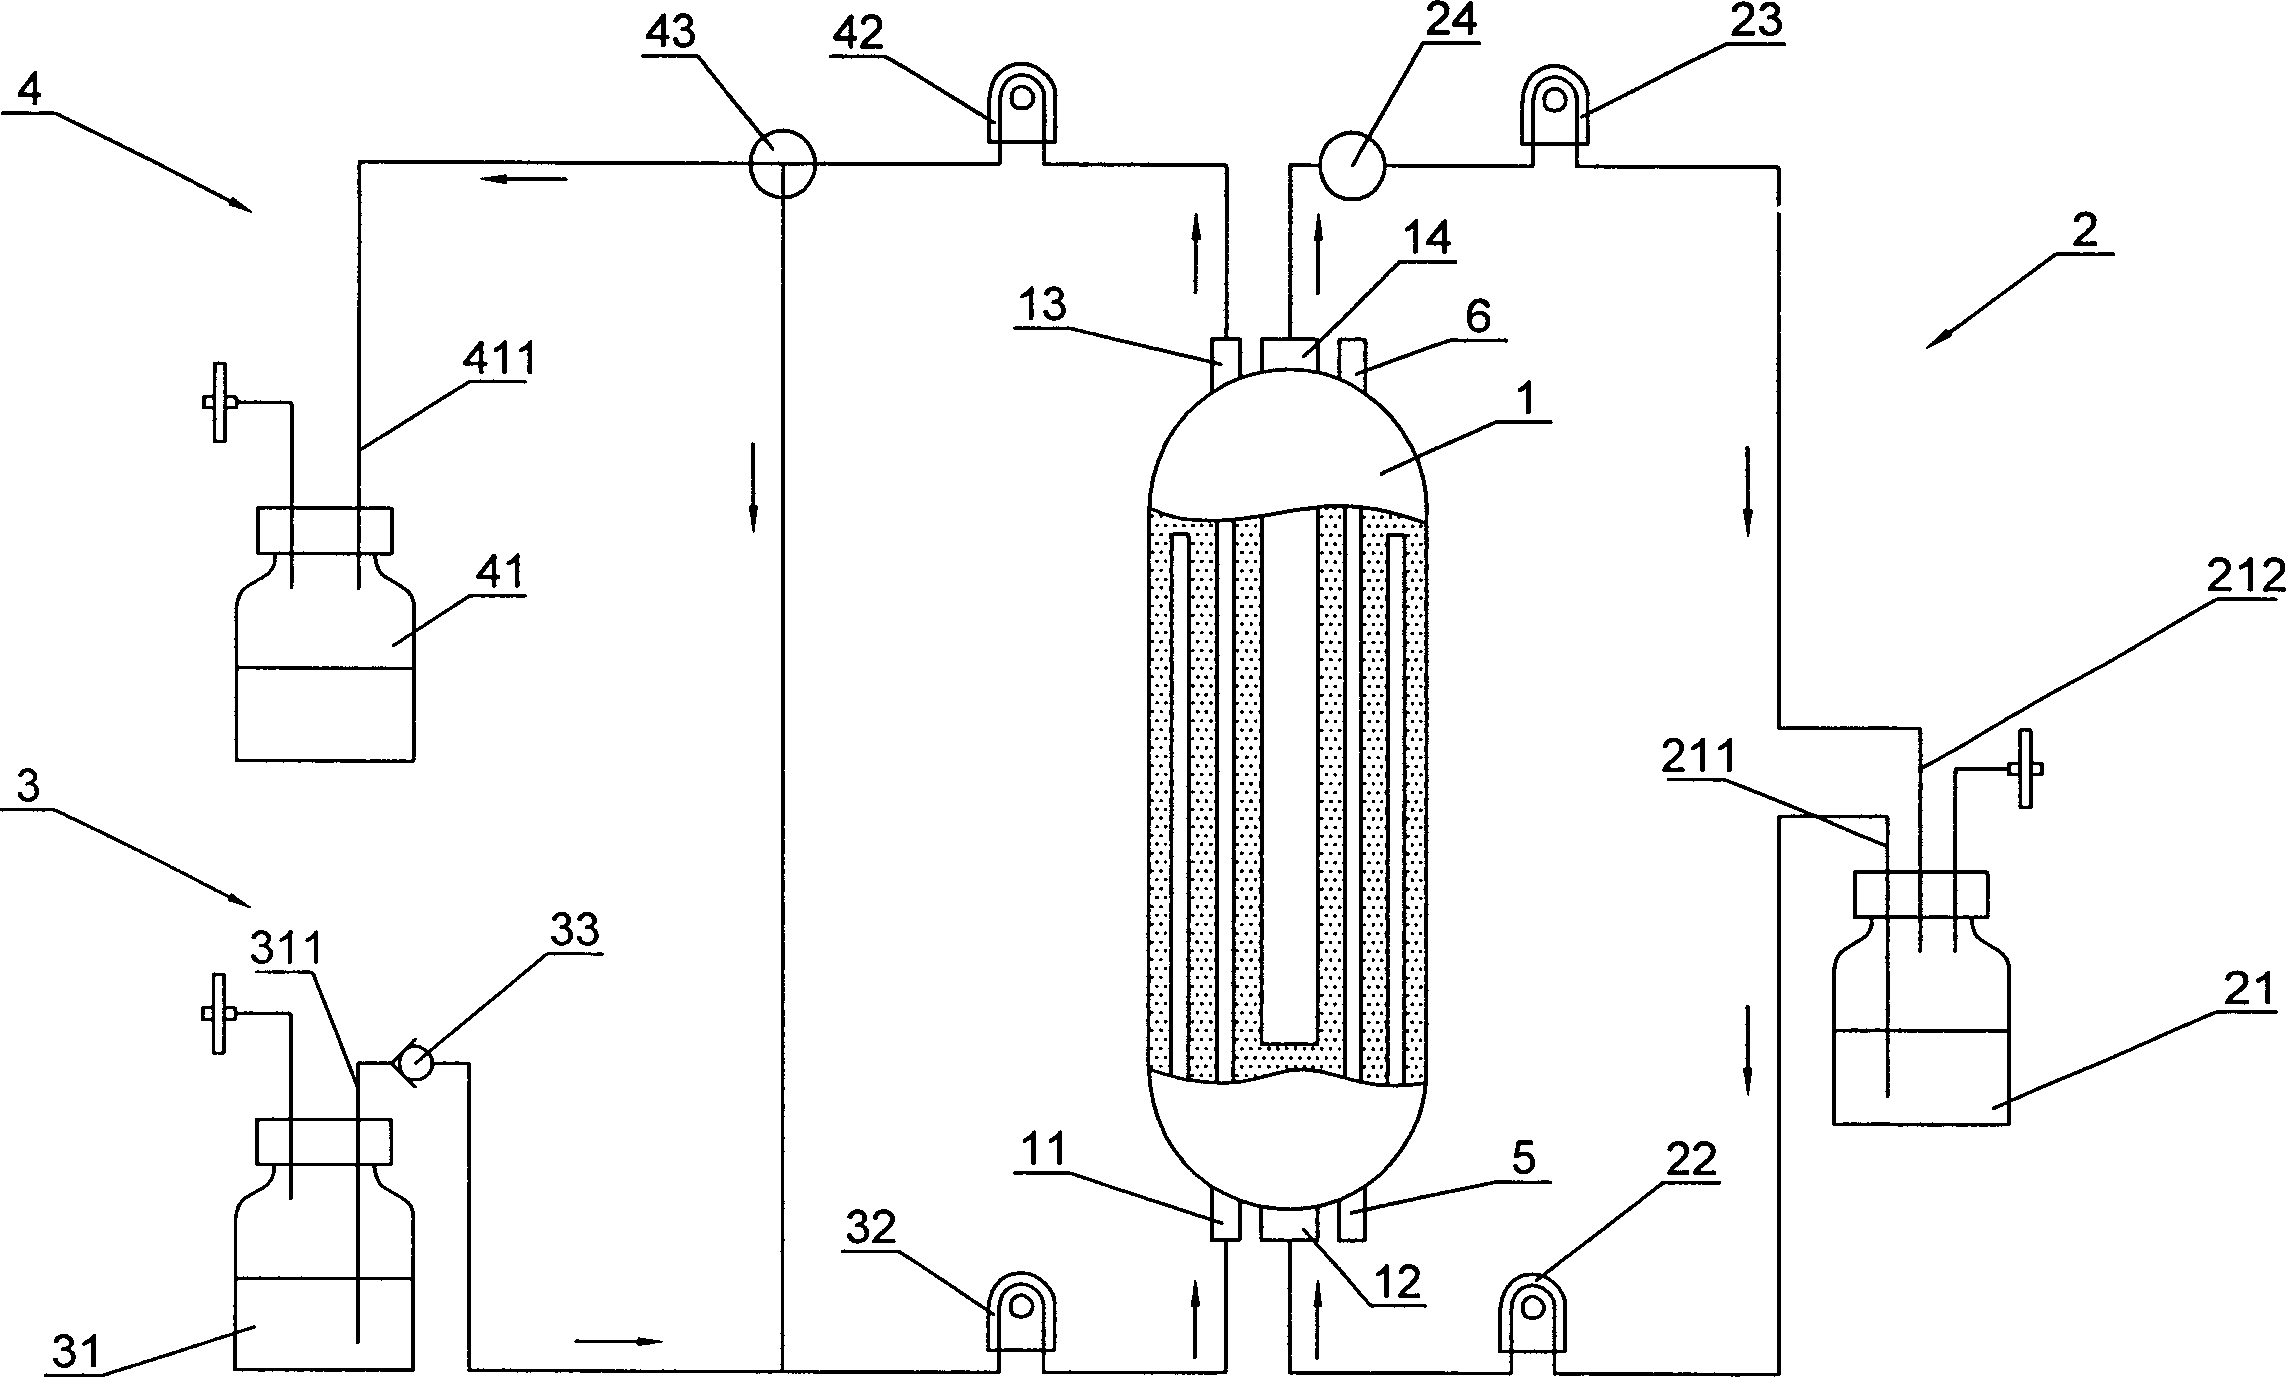 Cell culturation apparatus